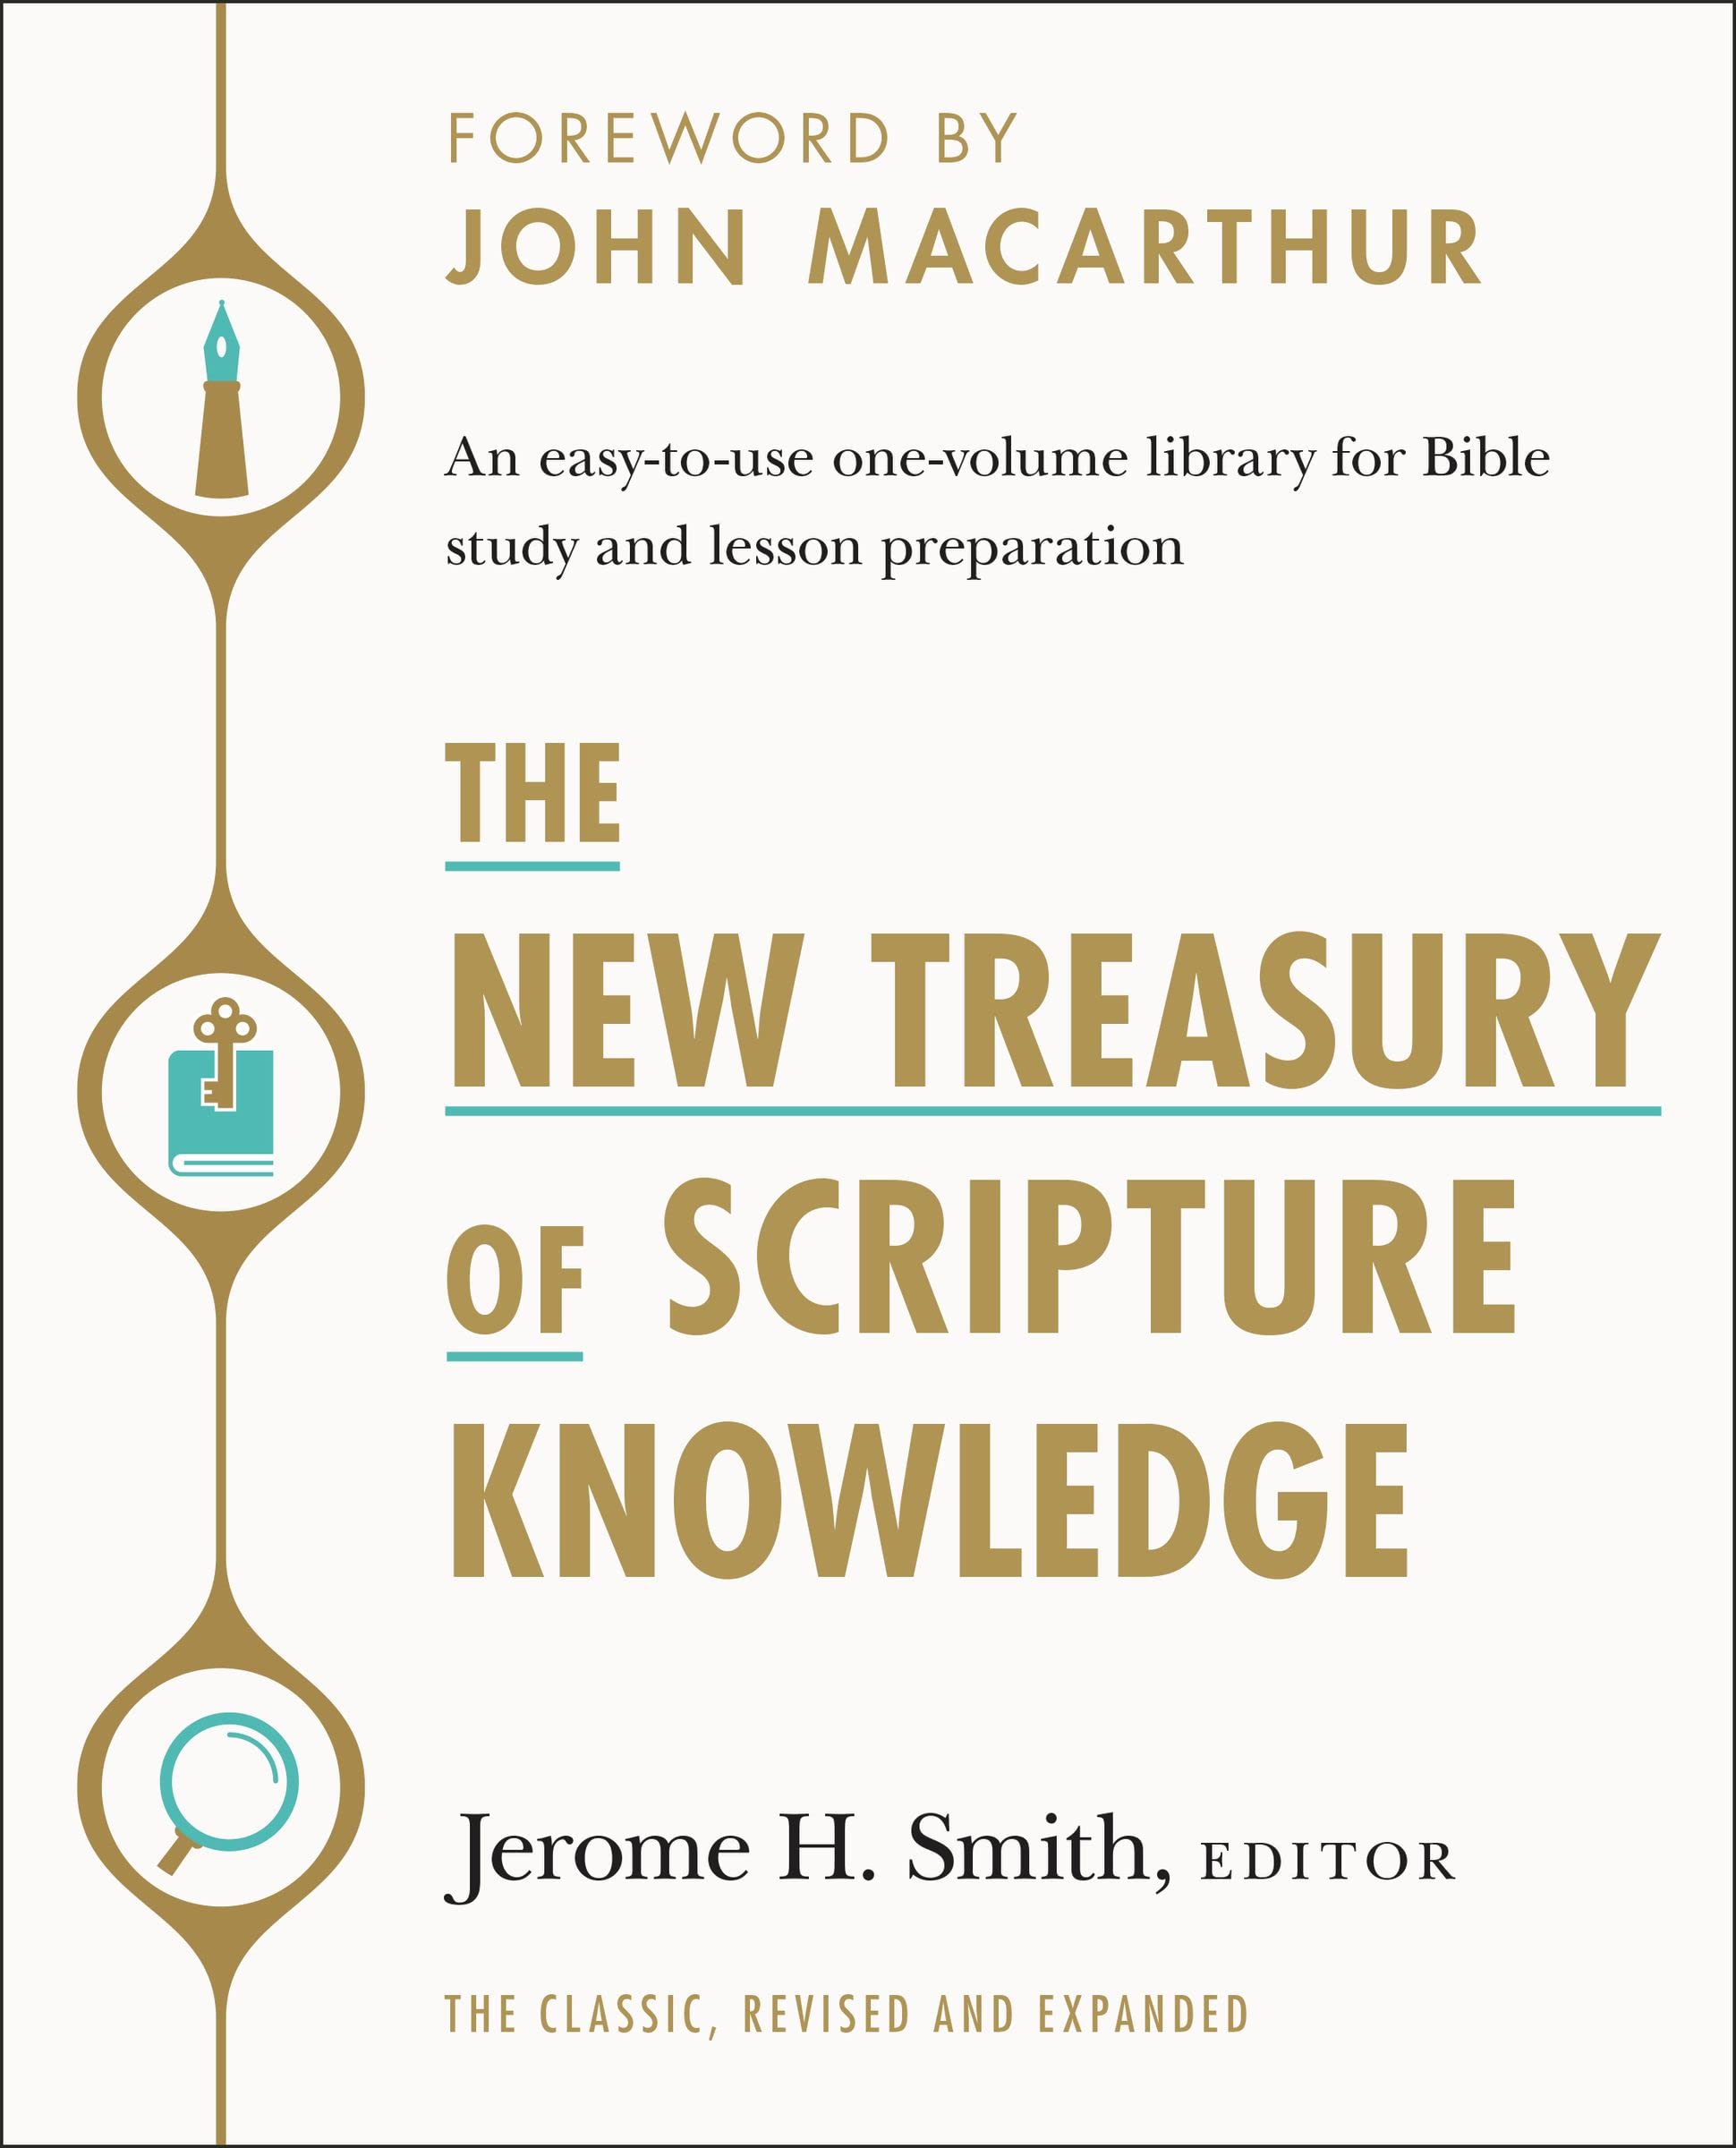 The New Treasury of Scripture Knowledge: An easy-to-use one-volume library for Bible study and lesson preparation